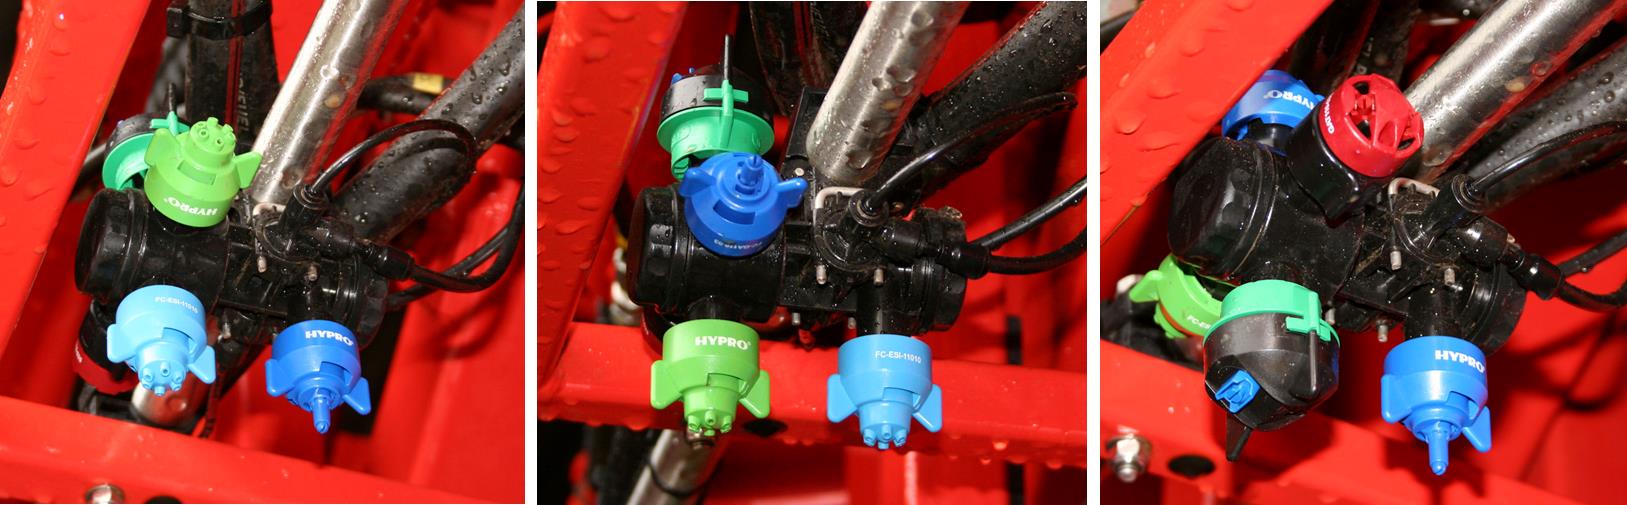 The Hypro Duo React body with different nozzle combinations including ESI six-stream fertiliser nozzle, Guardian Air low-drift and VPTech angled flat fan.